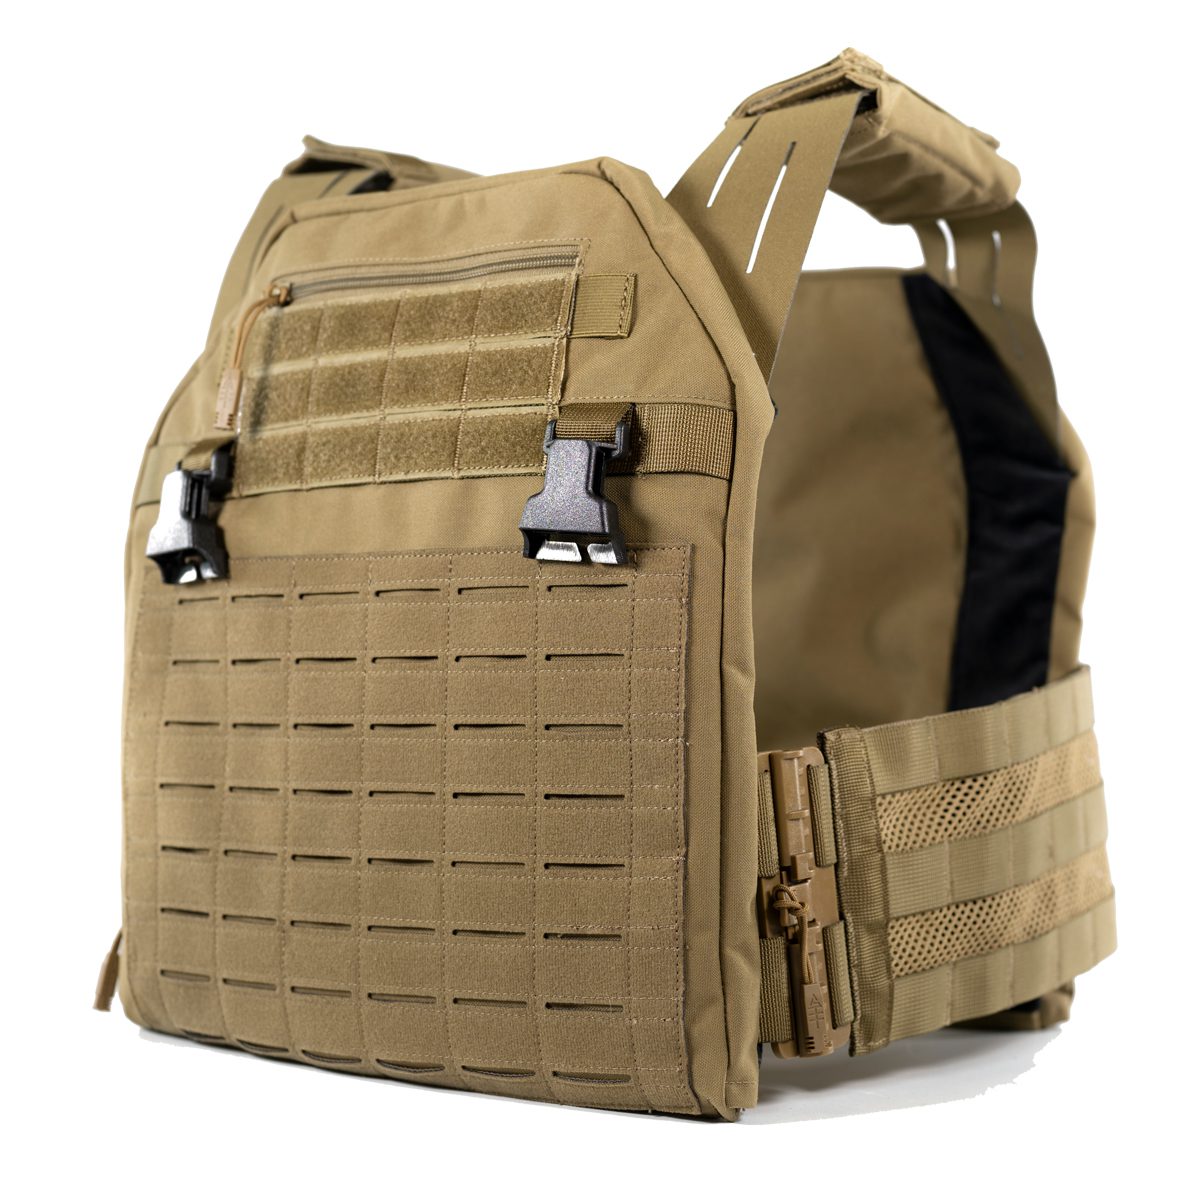 Defcon 5 Molle Recon Chest Rig  Up to 30% Off Customer Rated w/ Free S&H